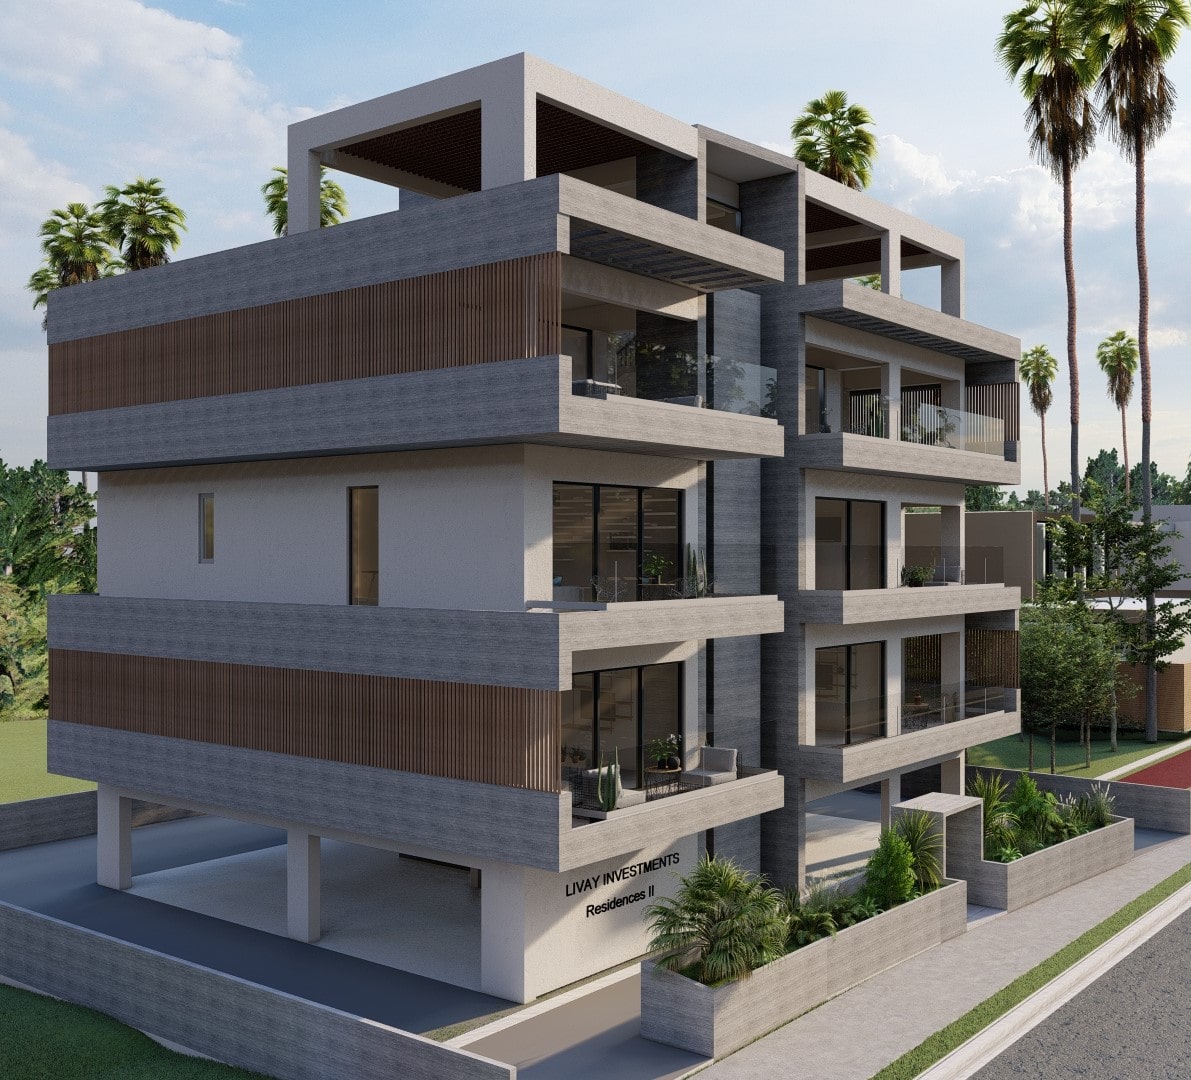 Apartments for sale in Limassol.